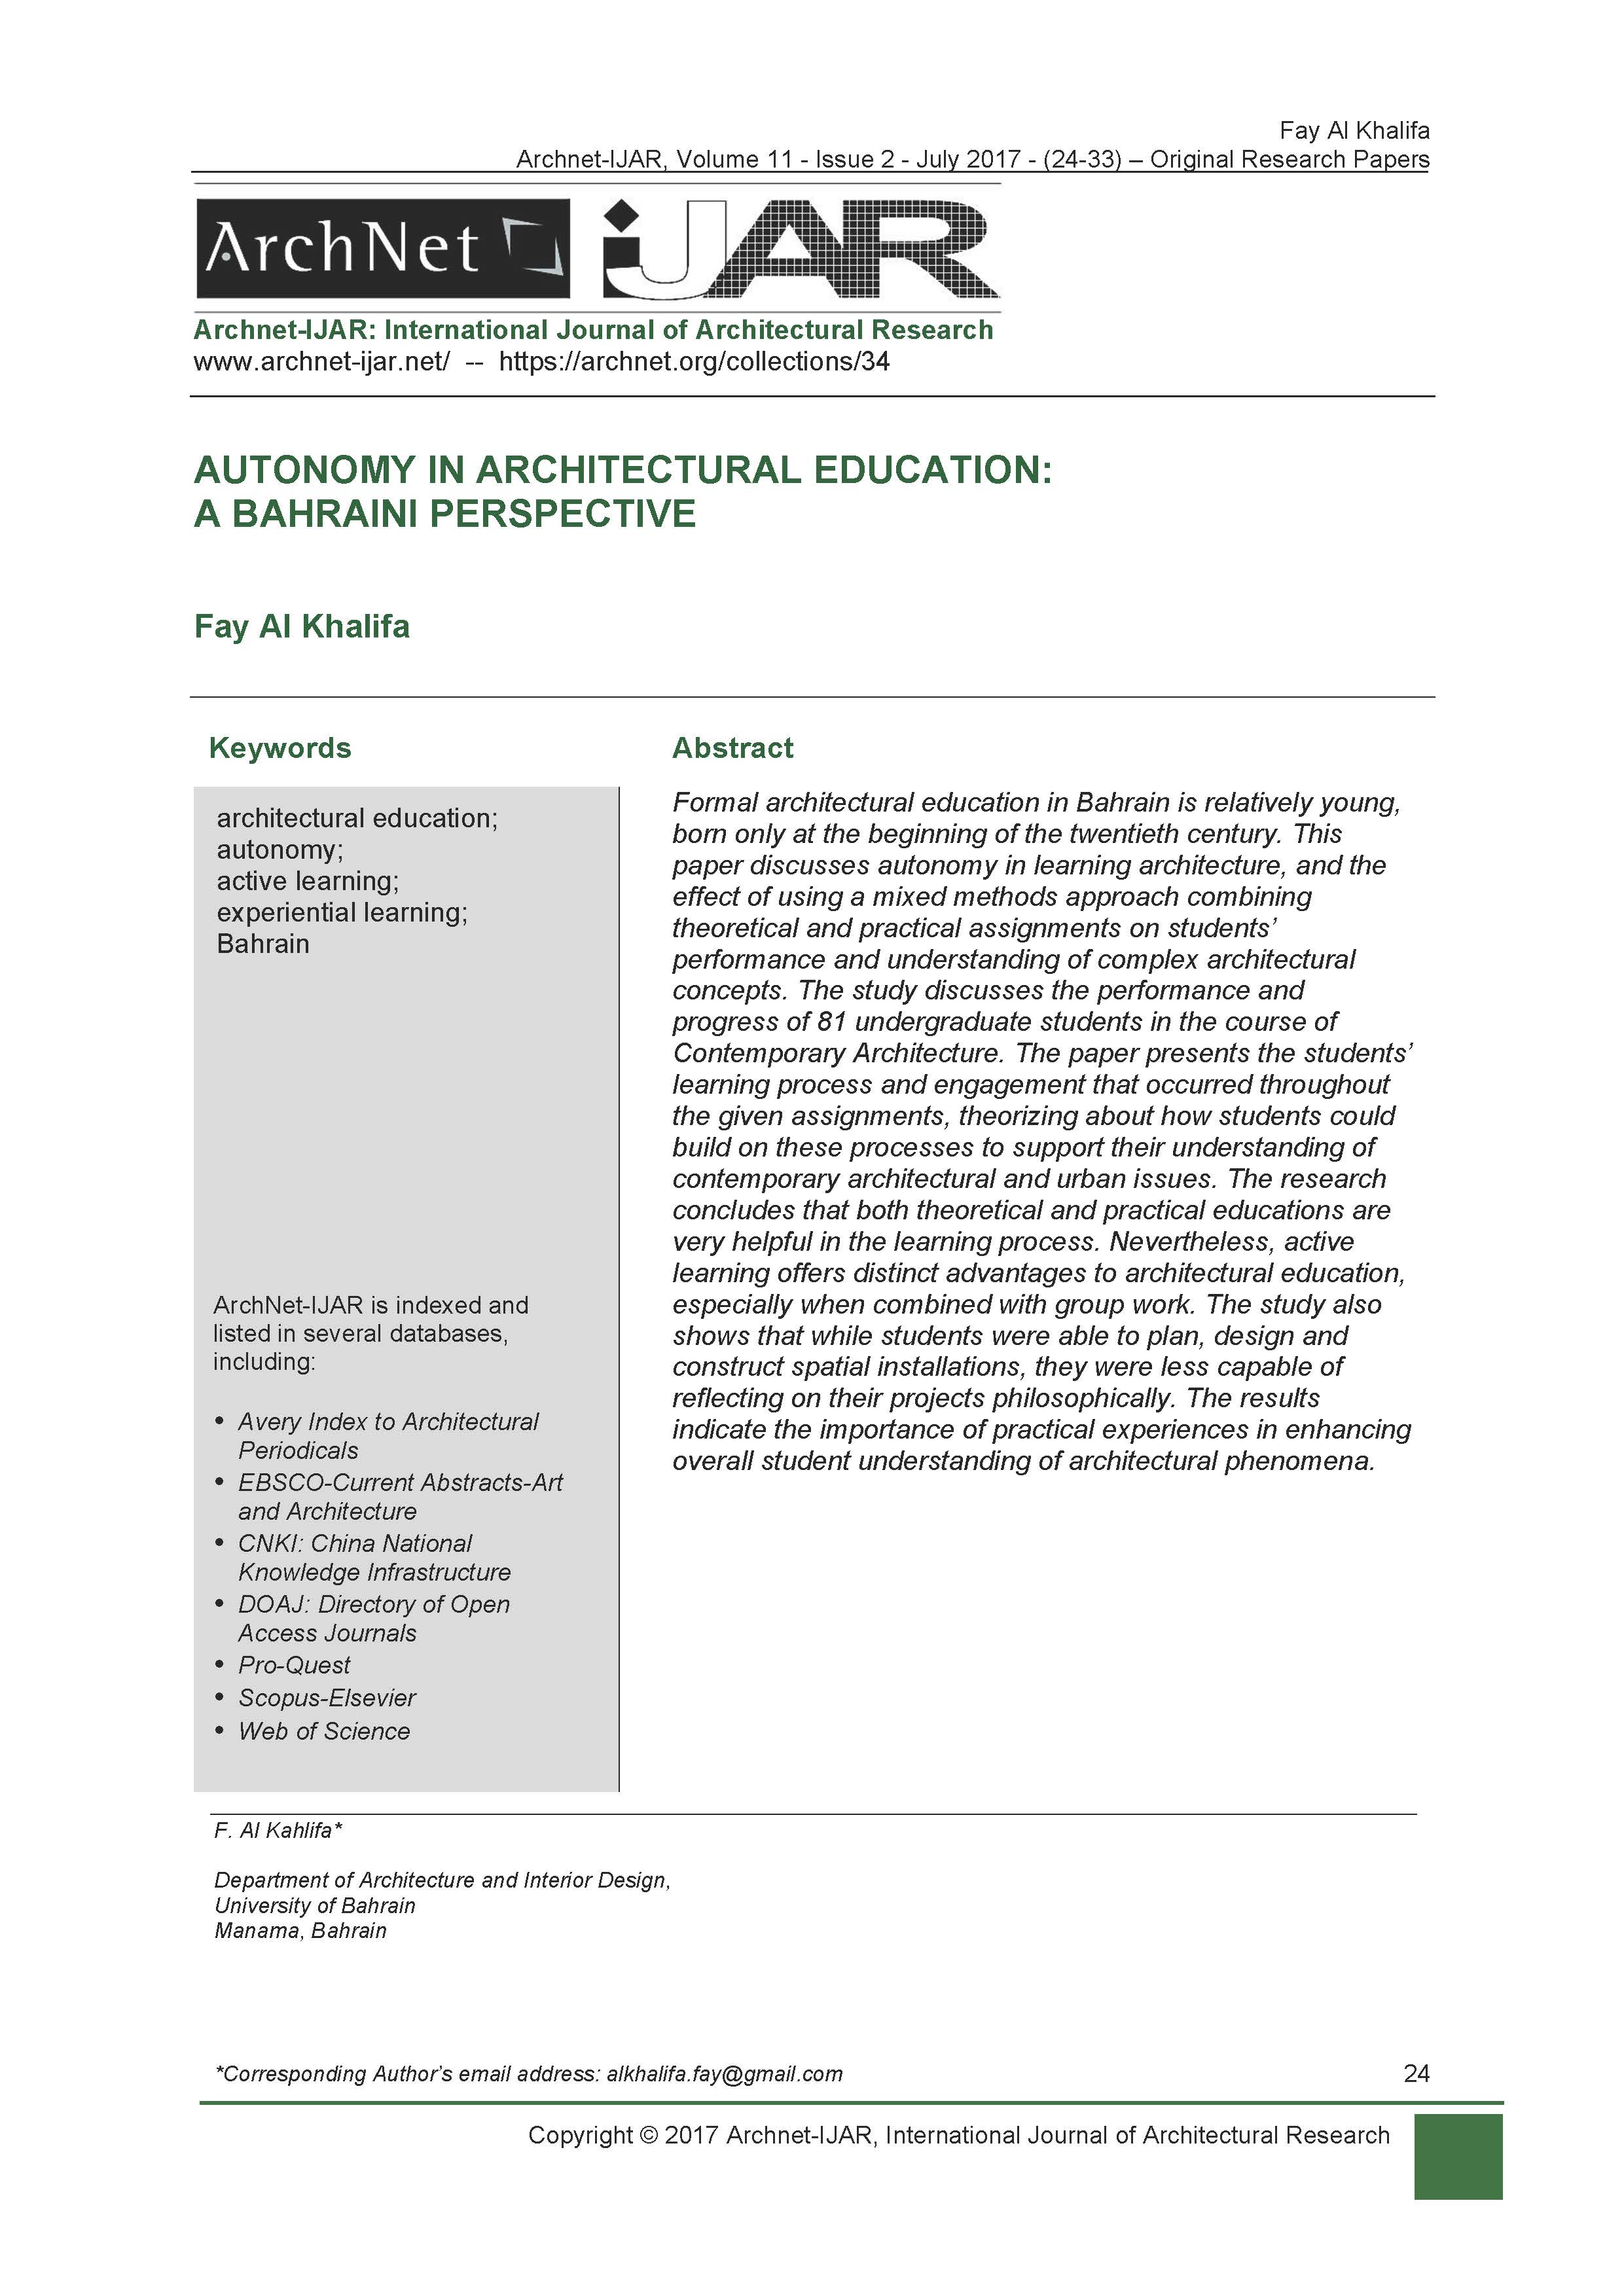 Fay Abdulla Al Khalifa - <div style="text-align: justify; "><span style="text-align: left;">Formal architectural education in Bahrain is relatively young, born only at the beginning of the twentieth century. This paper discusses autonomy in learning architecture, and the effect of using a mixed methods approach combining theoretical and practical assignments on students’ performance and understanding of complex architectural concepts. The study discusses the performance and progress of 81 undergraduate students in the course of Contemporary Architecture. The paper presents the students’ learning process and engagement that occurred throughout the given assignments, theorizing about how students could build on these processes to support their understanding of contemporary architectural and urban issues. The research concludes that both theoretical and practical educations are very helpful in the learning process. Nevertheless, active learning offers distinct advantages to architectural education, especially when combined with group work. The study also shows that while students were able to plan, design and construct spatial installations, they were less capable of reflecting on their projects philosophically. The results indicate the importance of practical experiences in enhancing overall student understanding of architectural phenomena.</span></div><div style="text-align: justify; "><span style="text-align: left;"><br></span></div><div style="text-align: justify; "><span style="text-align: left; font-weight: bold;">Keywords:</span></div><div style="text-align: justify; "><span style="text-align: left;"><br></span></div><div style="" keywords<="" h4=""><div style="">architectural education; autonomy; active learning; experiential learning; Bahrain</div></div><div style="text-align: justify; "><span style="text-align: left;"><br></span></div>